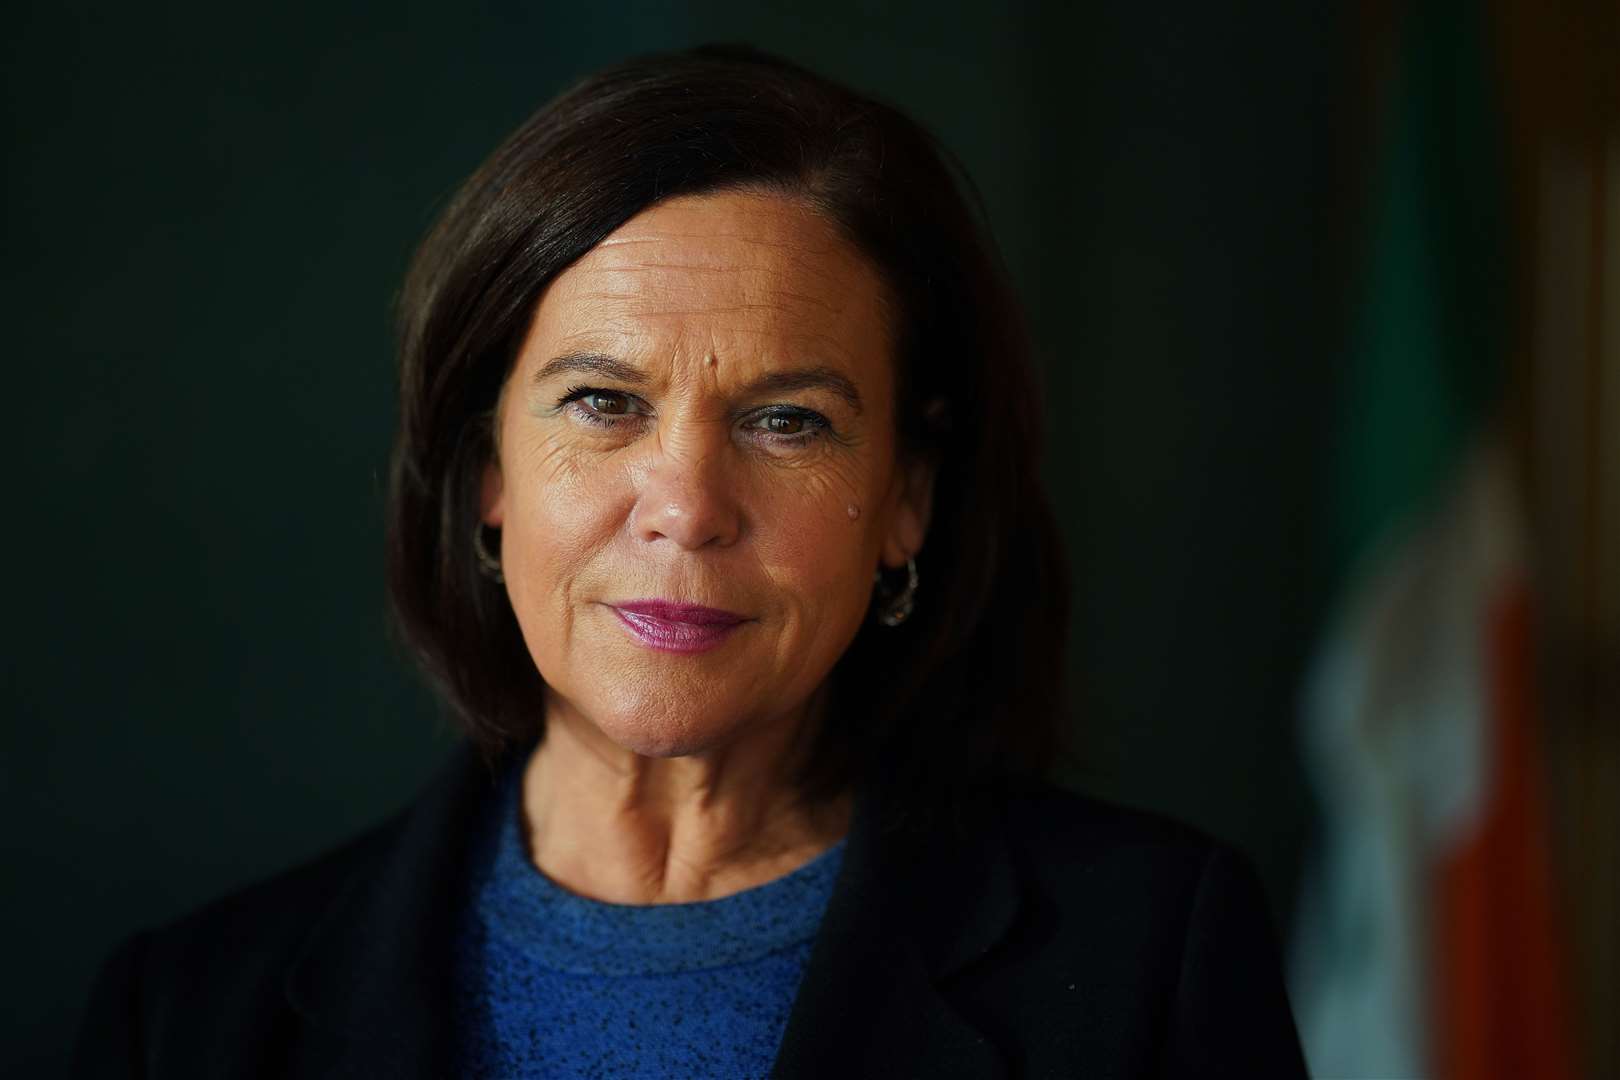 Sinn Fein leader Mary Lou McDonald called for an urgent summit on legacy issues (Brian Lawless/PA)